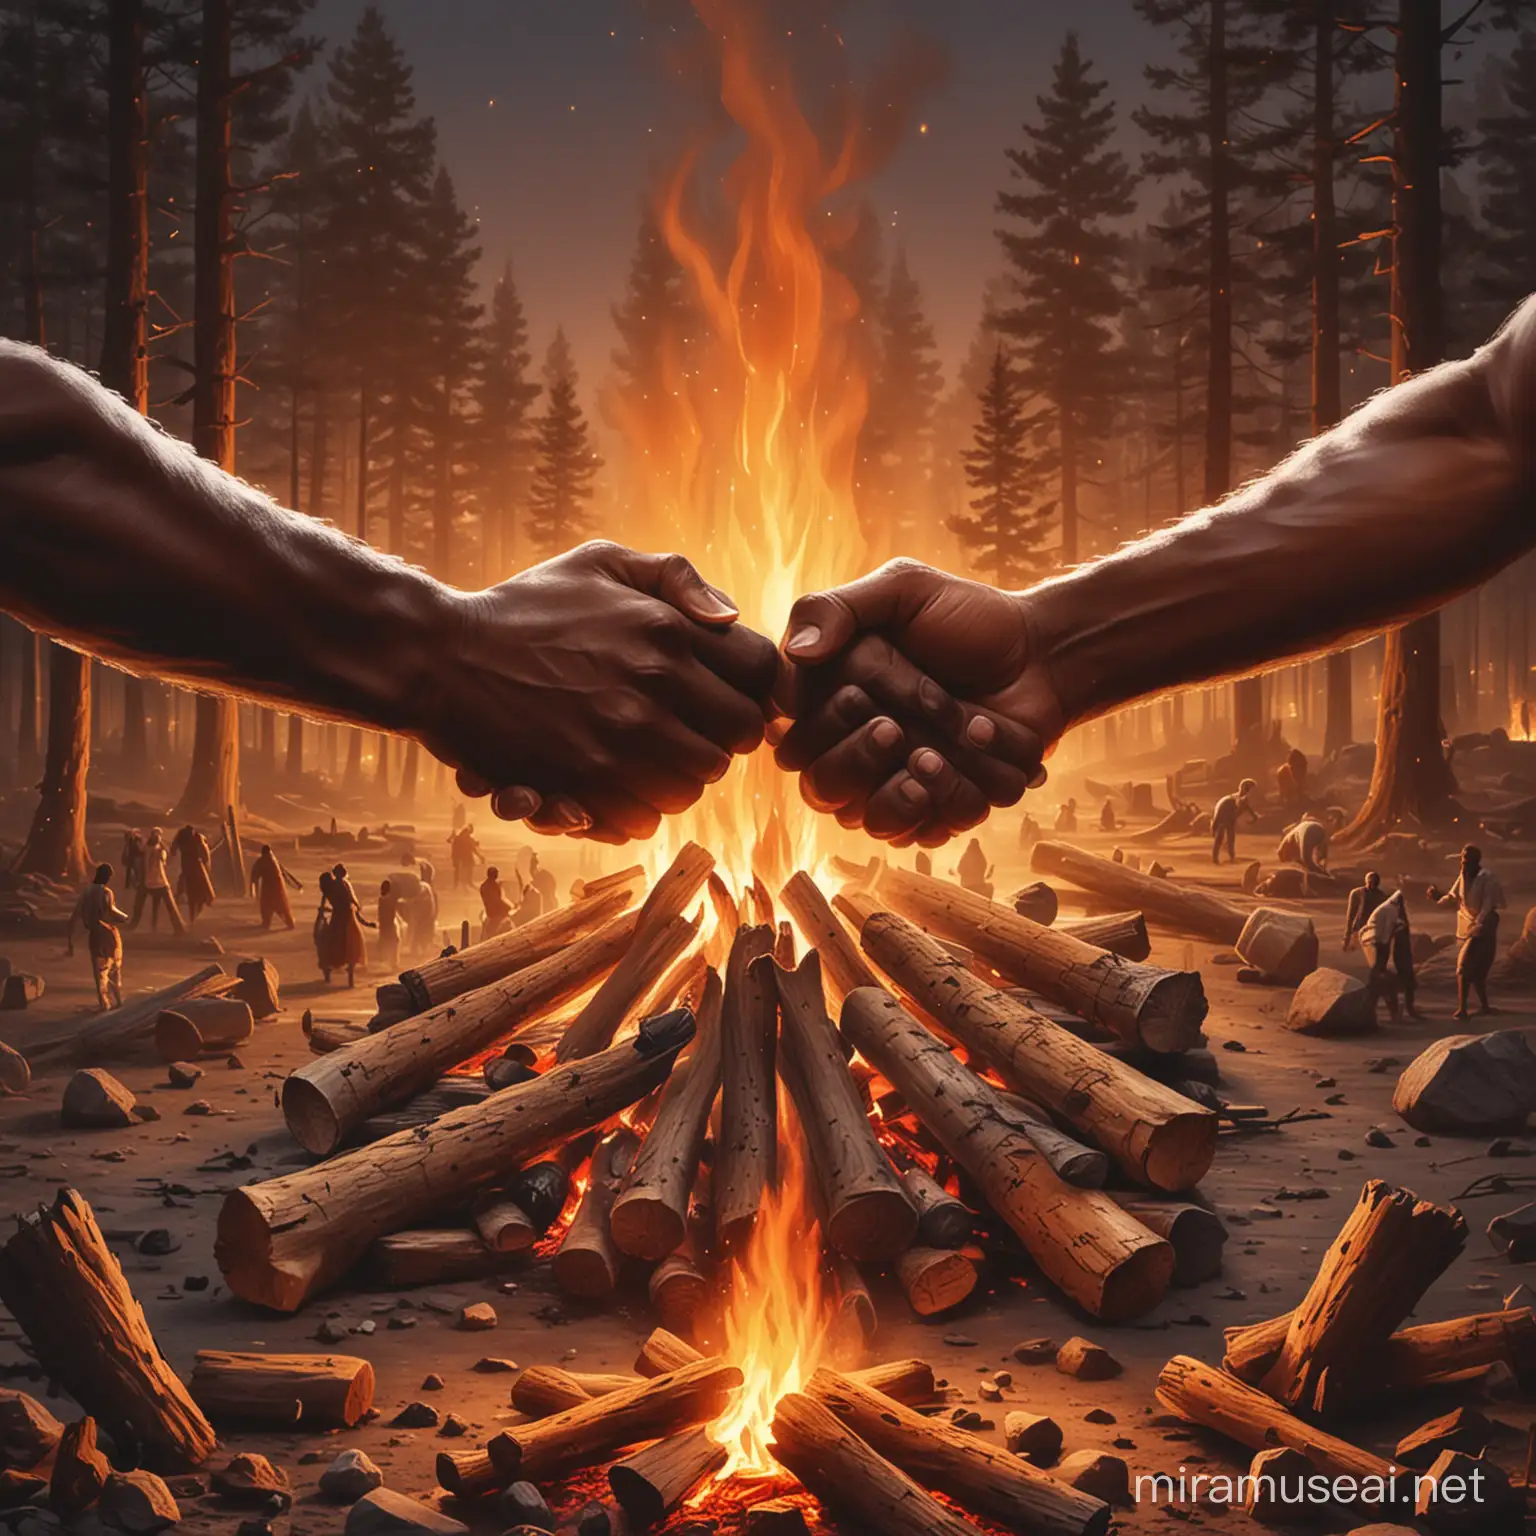 united black people holding hands around camp fire vector